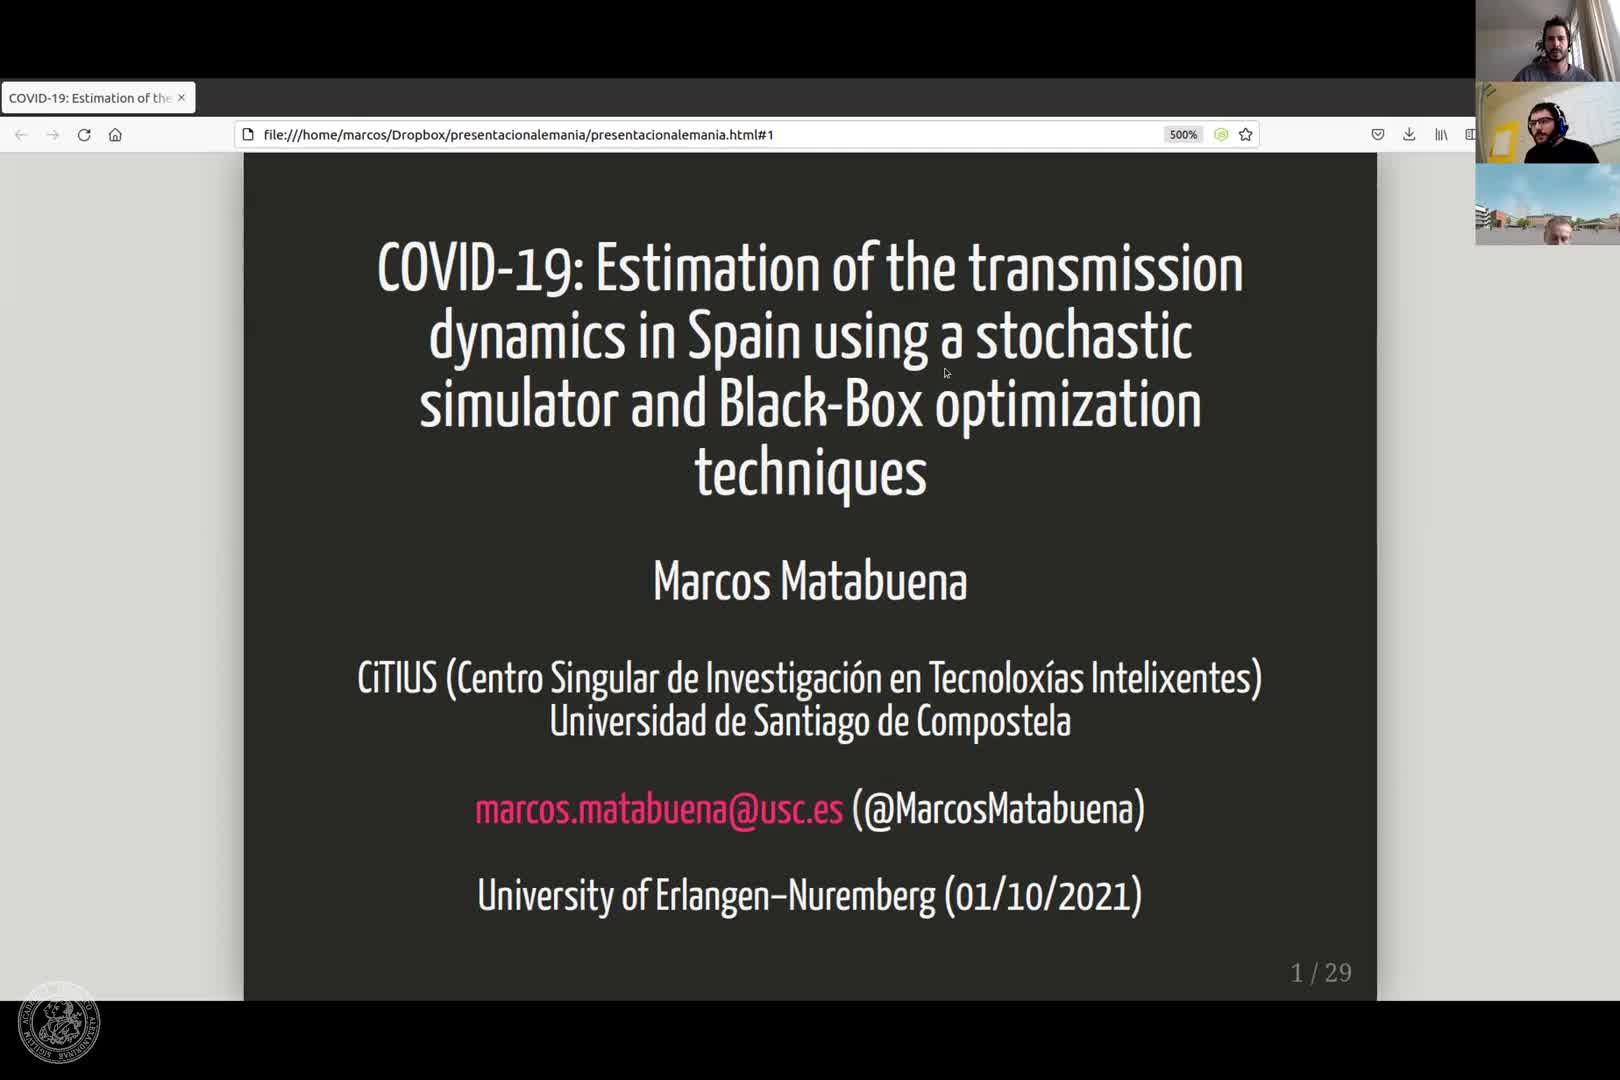 COVID-19: Estimating spread in Spain solving an inverse problem with a probabilistic model (Marcos Matabuena, -CiTIUS) preview image